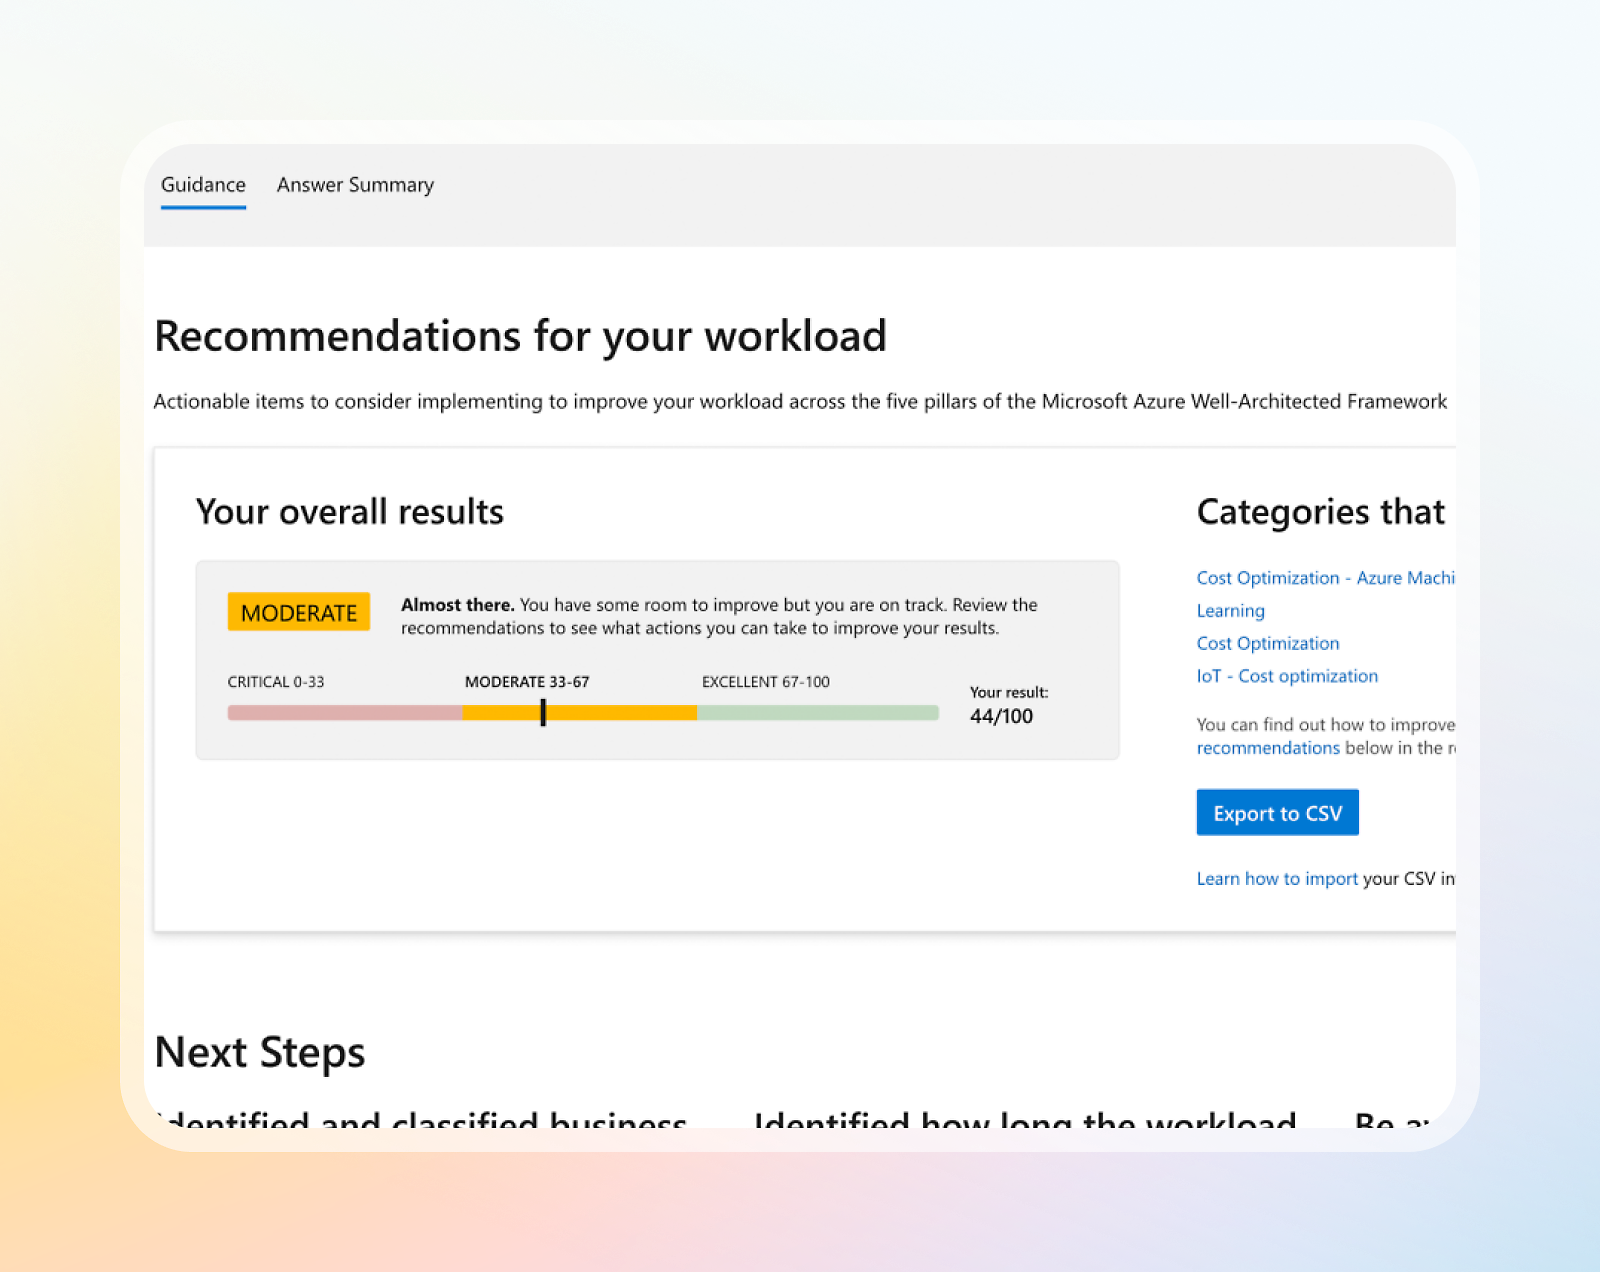 Screenshot of a webpage titled "Recommendations for your workload" showing a gauge with a score of "44" indicating a moderate rating